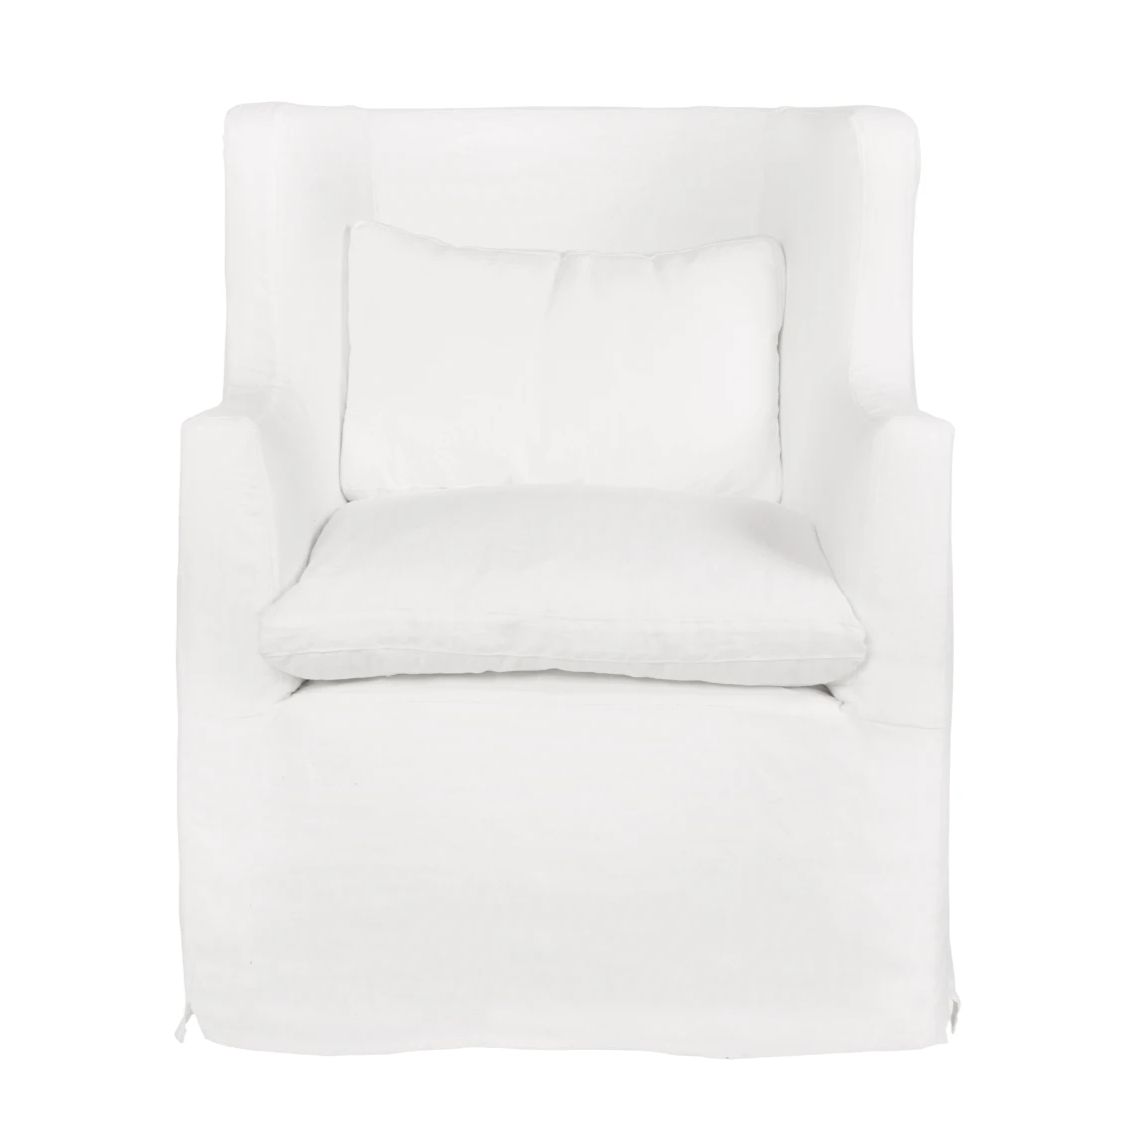 The Havana Wing Chair by Cisco Brothers has a tall back with gorgeous curved arms. The go-to chair for guests or your favorite chair to read your latest novel in -- this will complete the look for any living room or lounge area. Shown in slipcover Otis White.   Overall Dimensions: 32"w x 40"h x 32"d